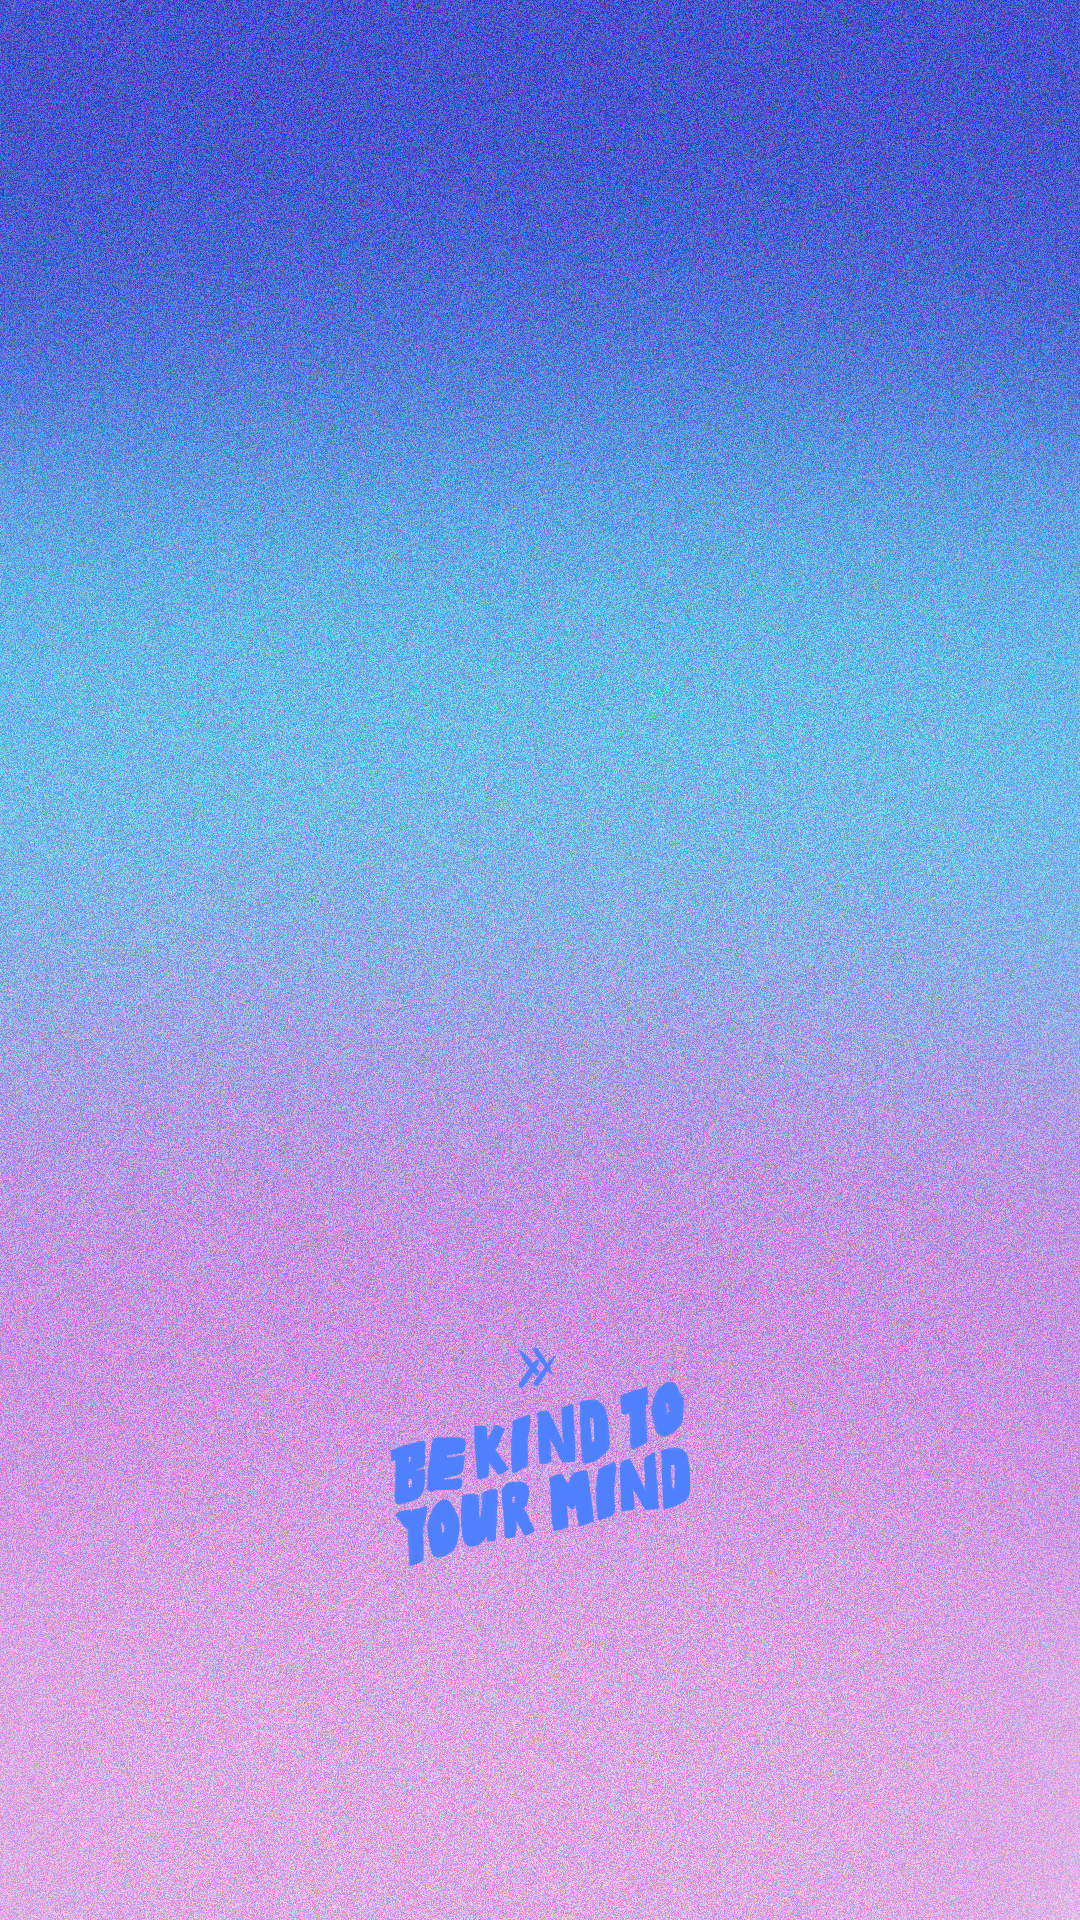 Be Kind to Your Mind wallpaper